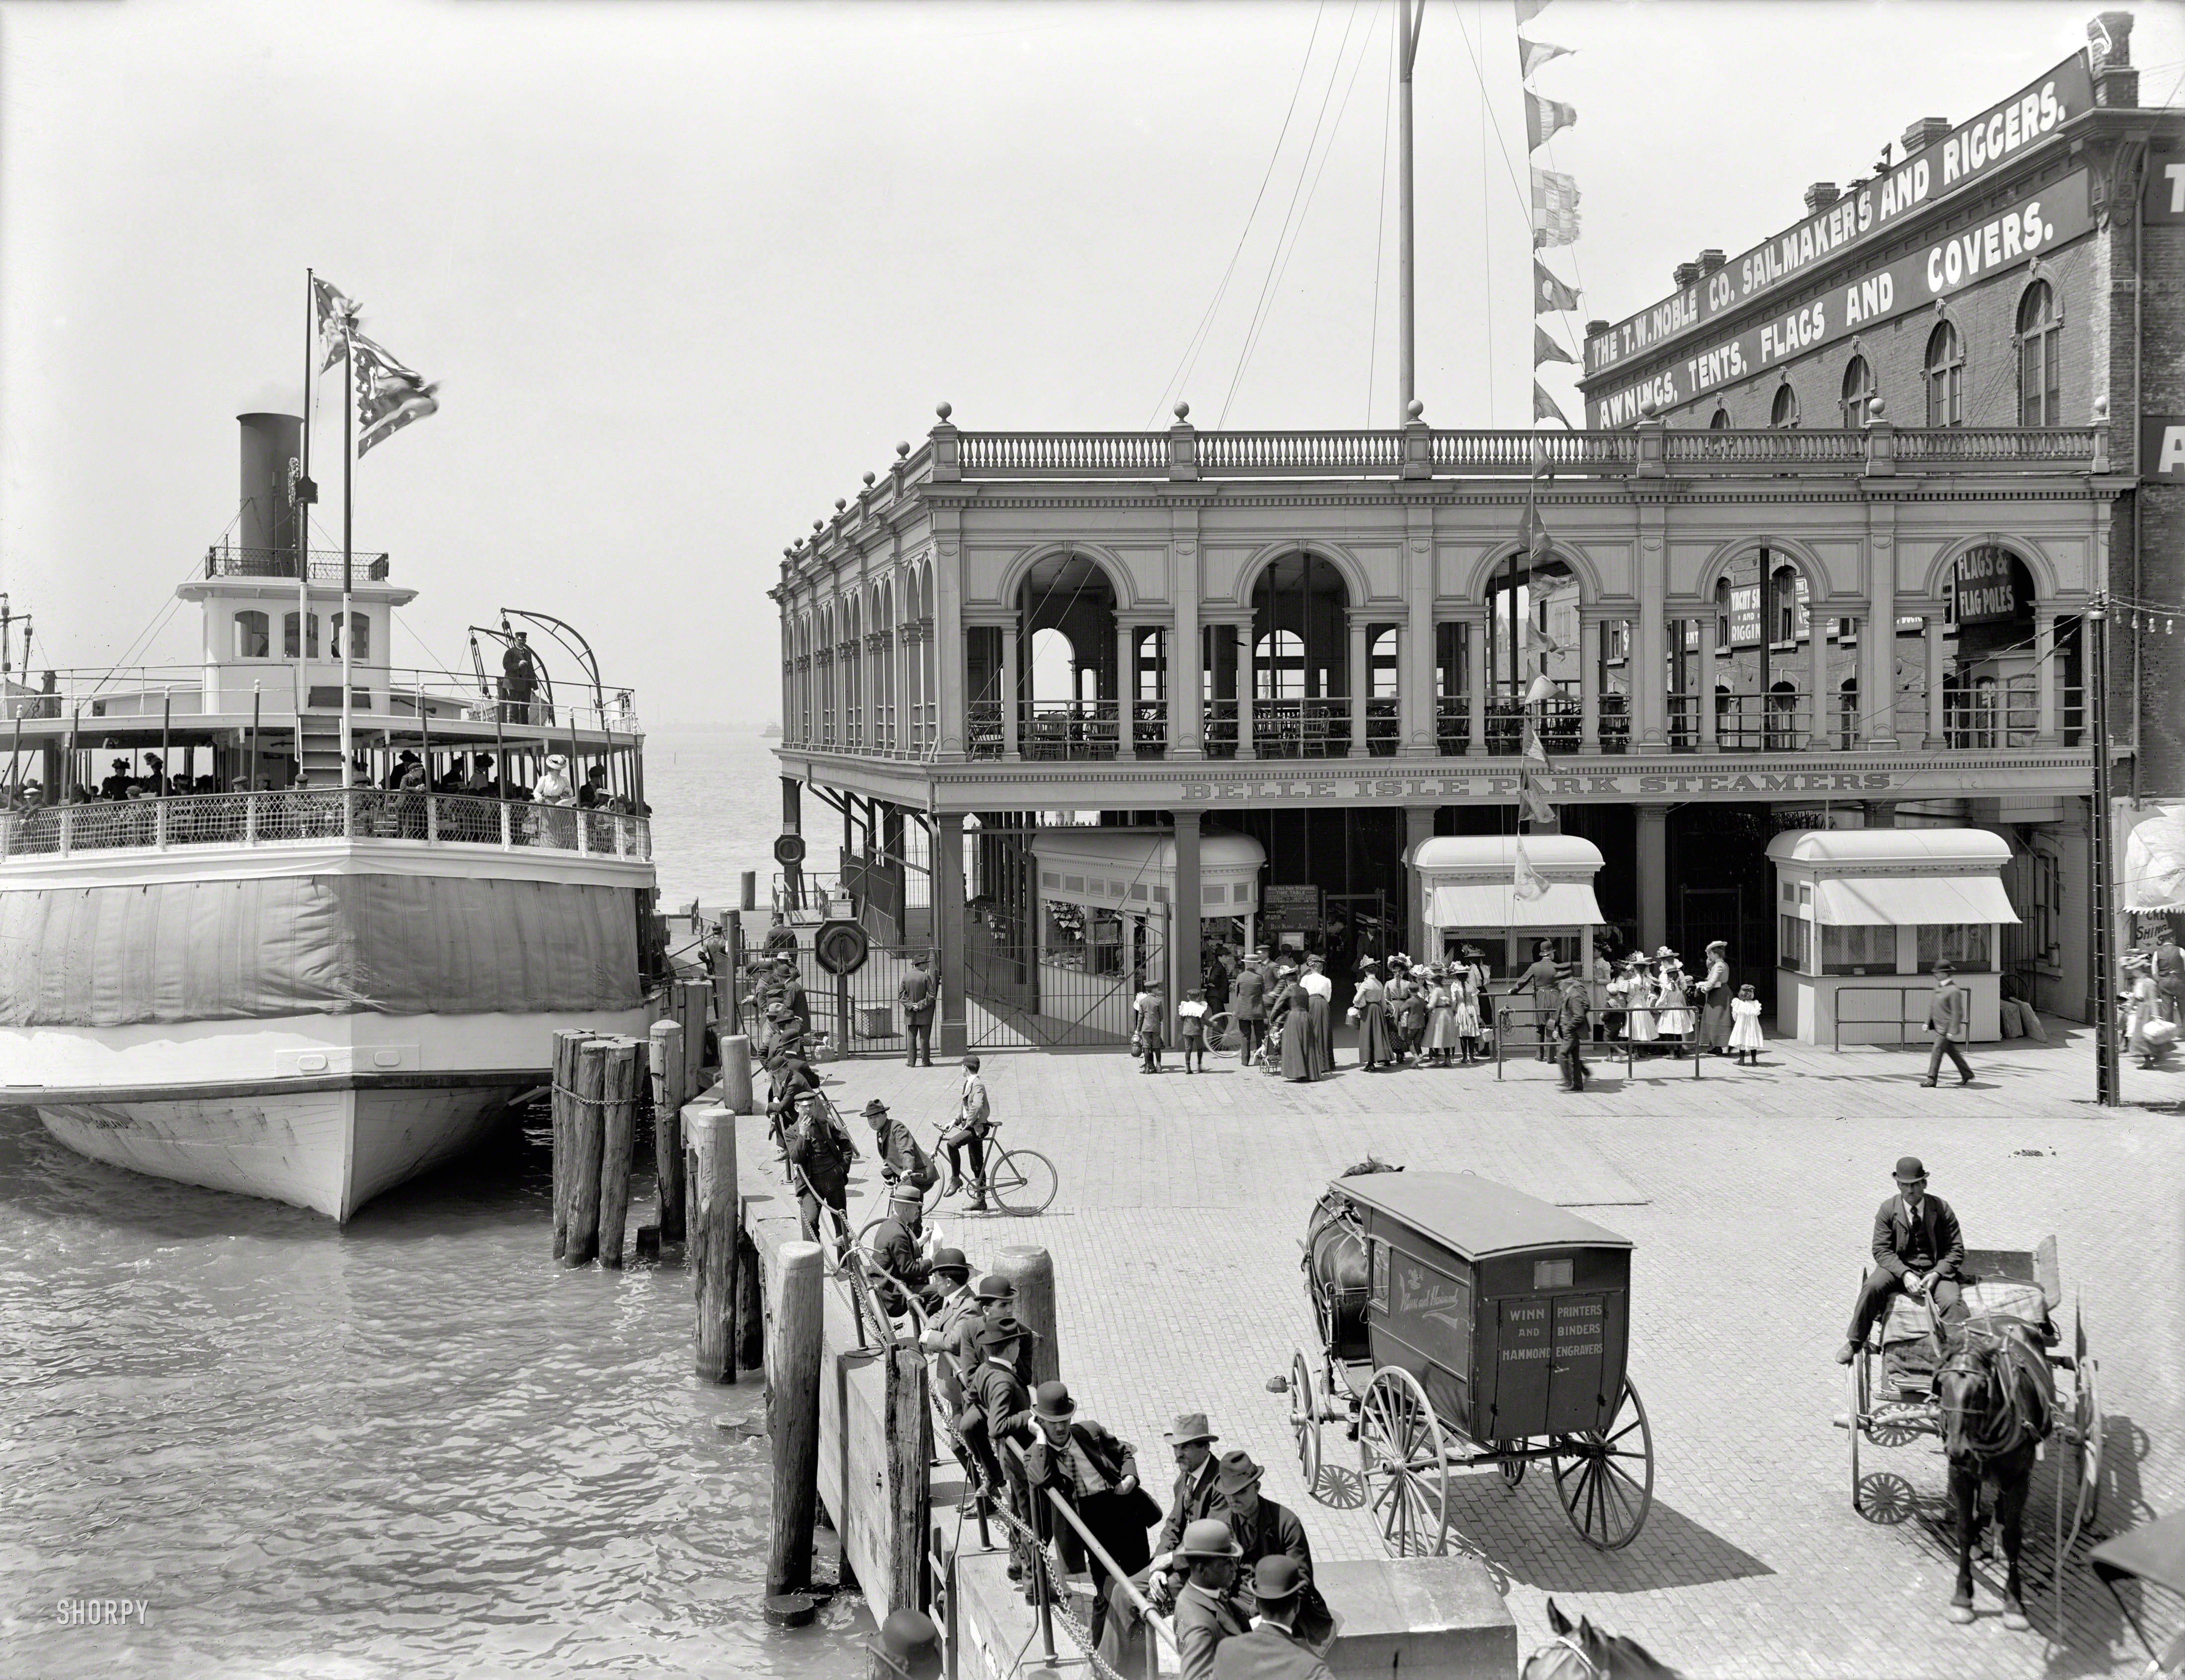 Detroit circa 1905. "Belle Isle ferry dock." A good place to pick up a yacht sail. The steamer Garland, seen earlier here. 8x10 glass negative. View full size.